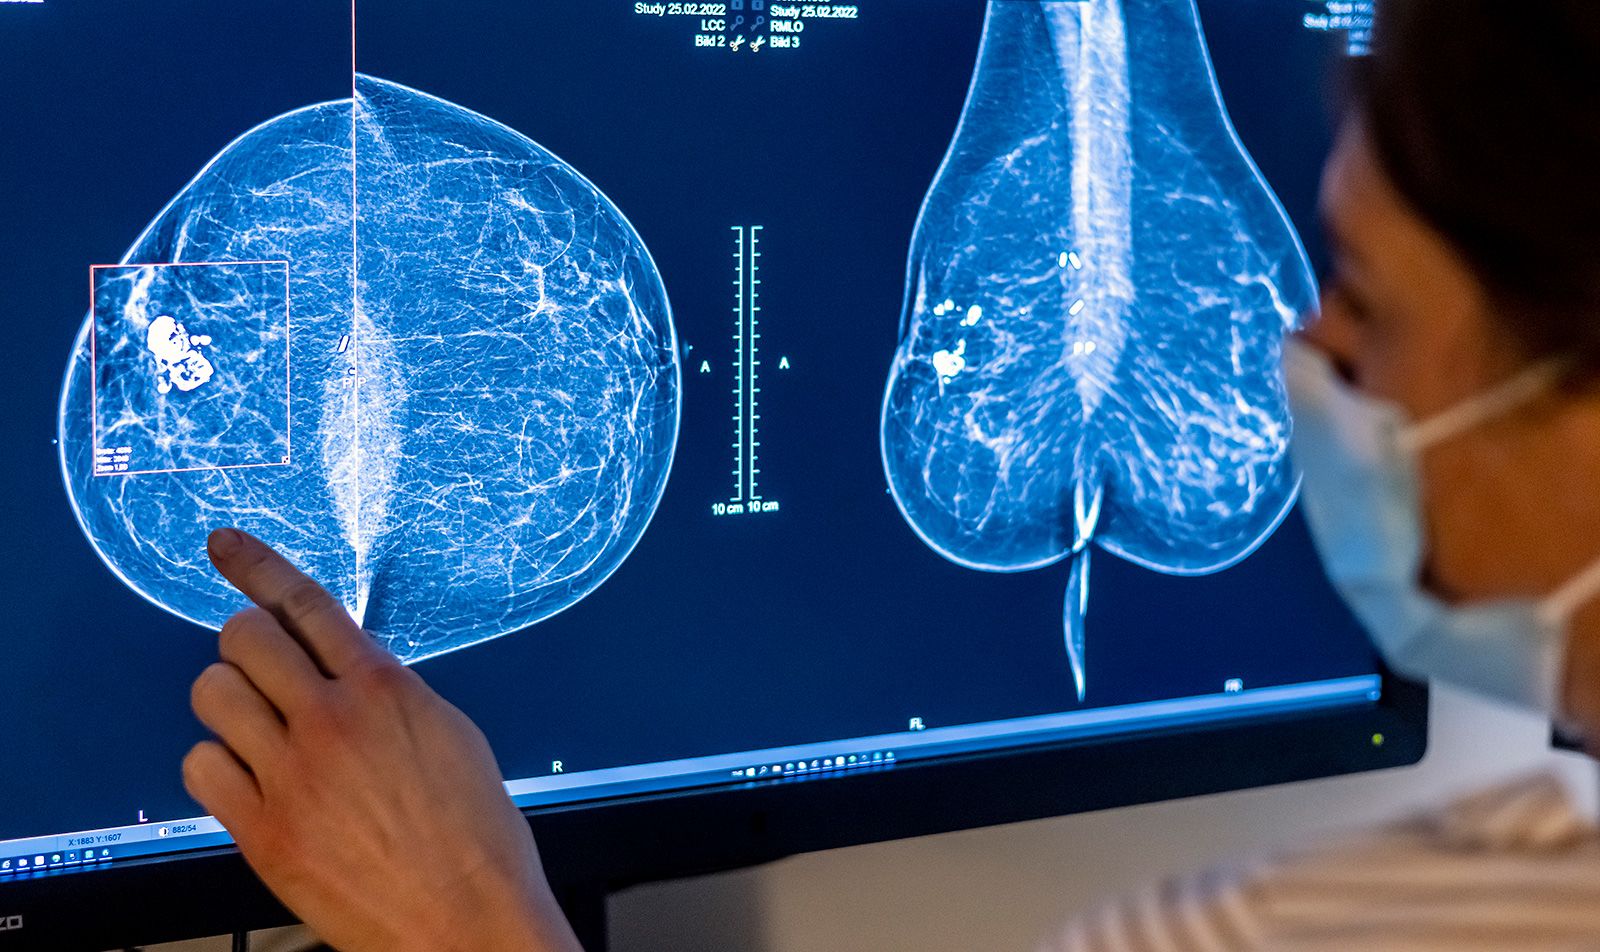 1 in 10 women ages 40+ have never had a breast cancer screening